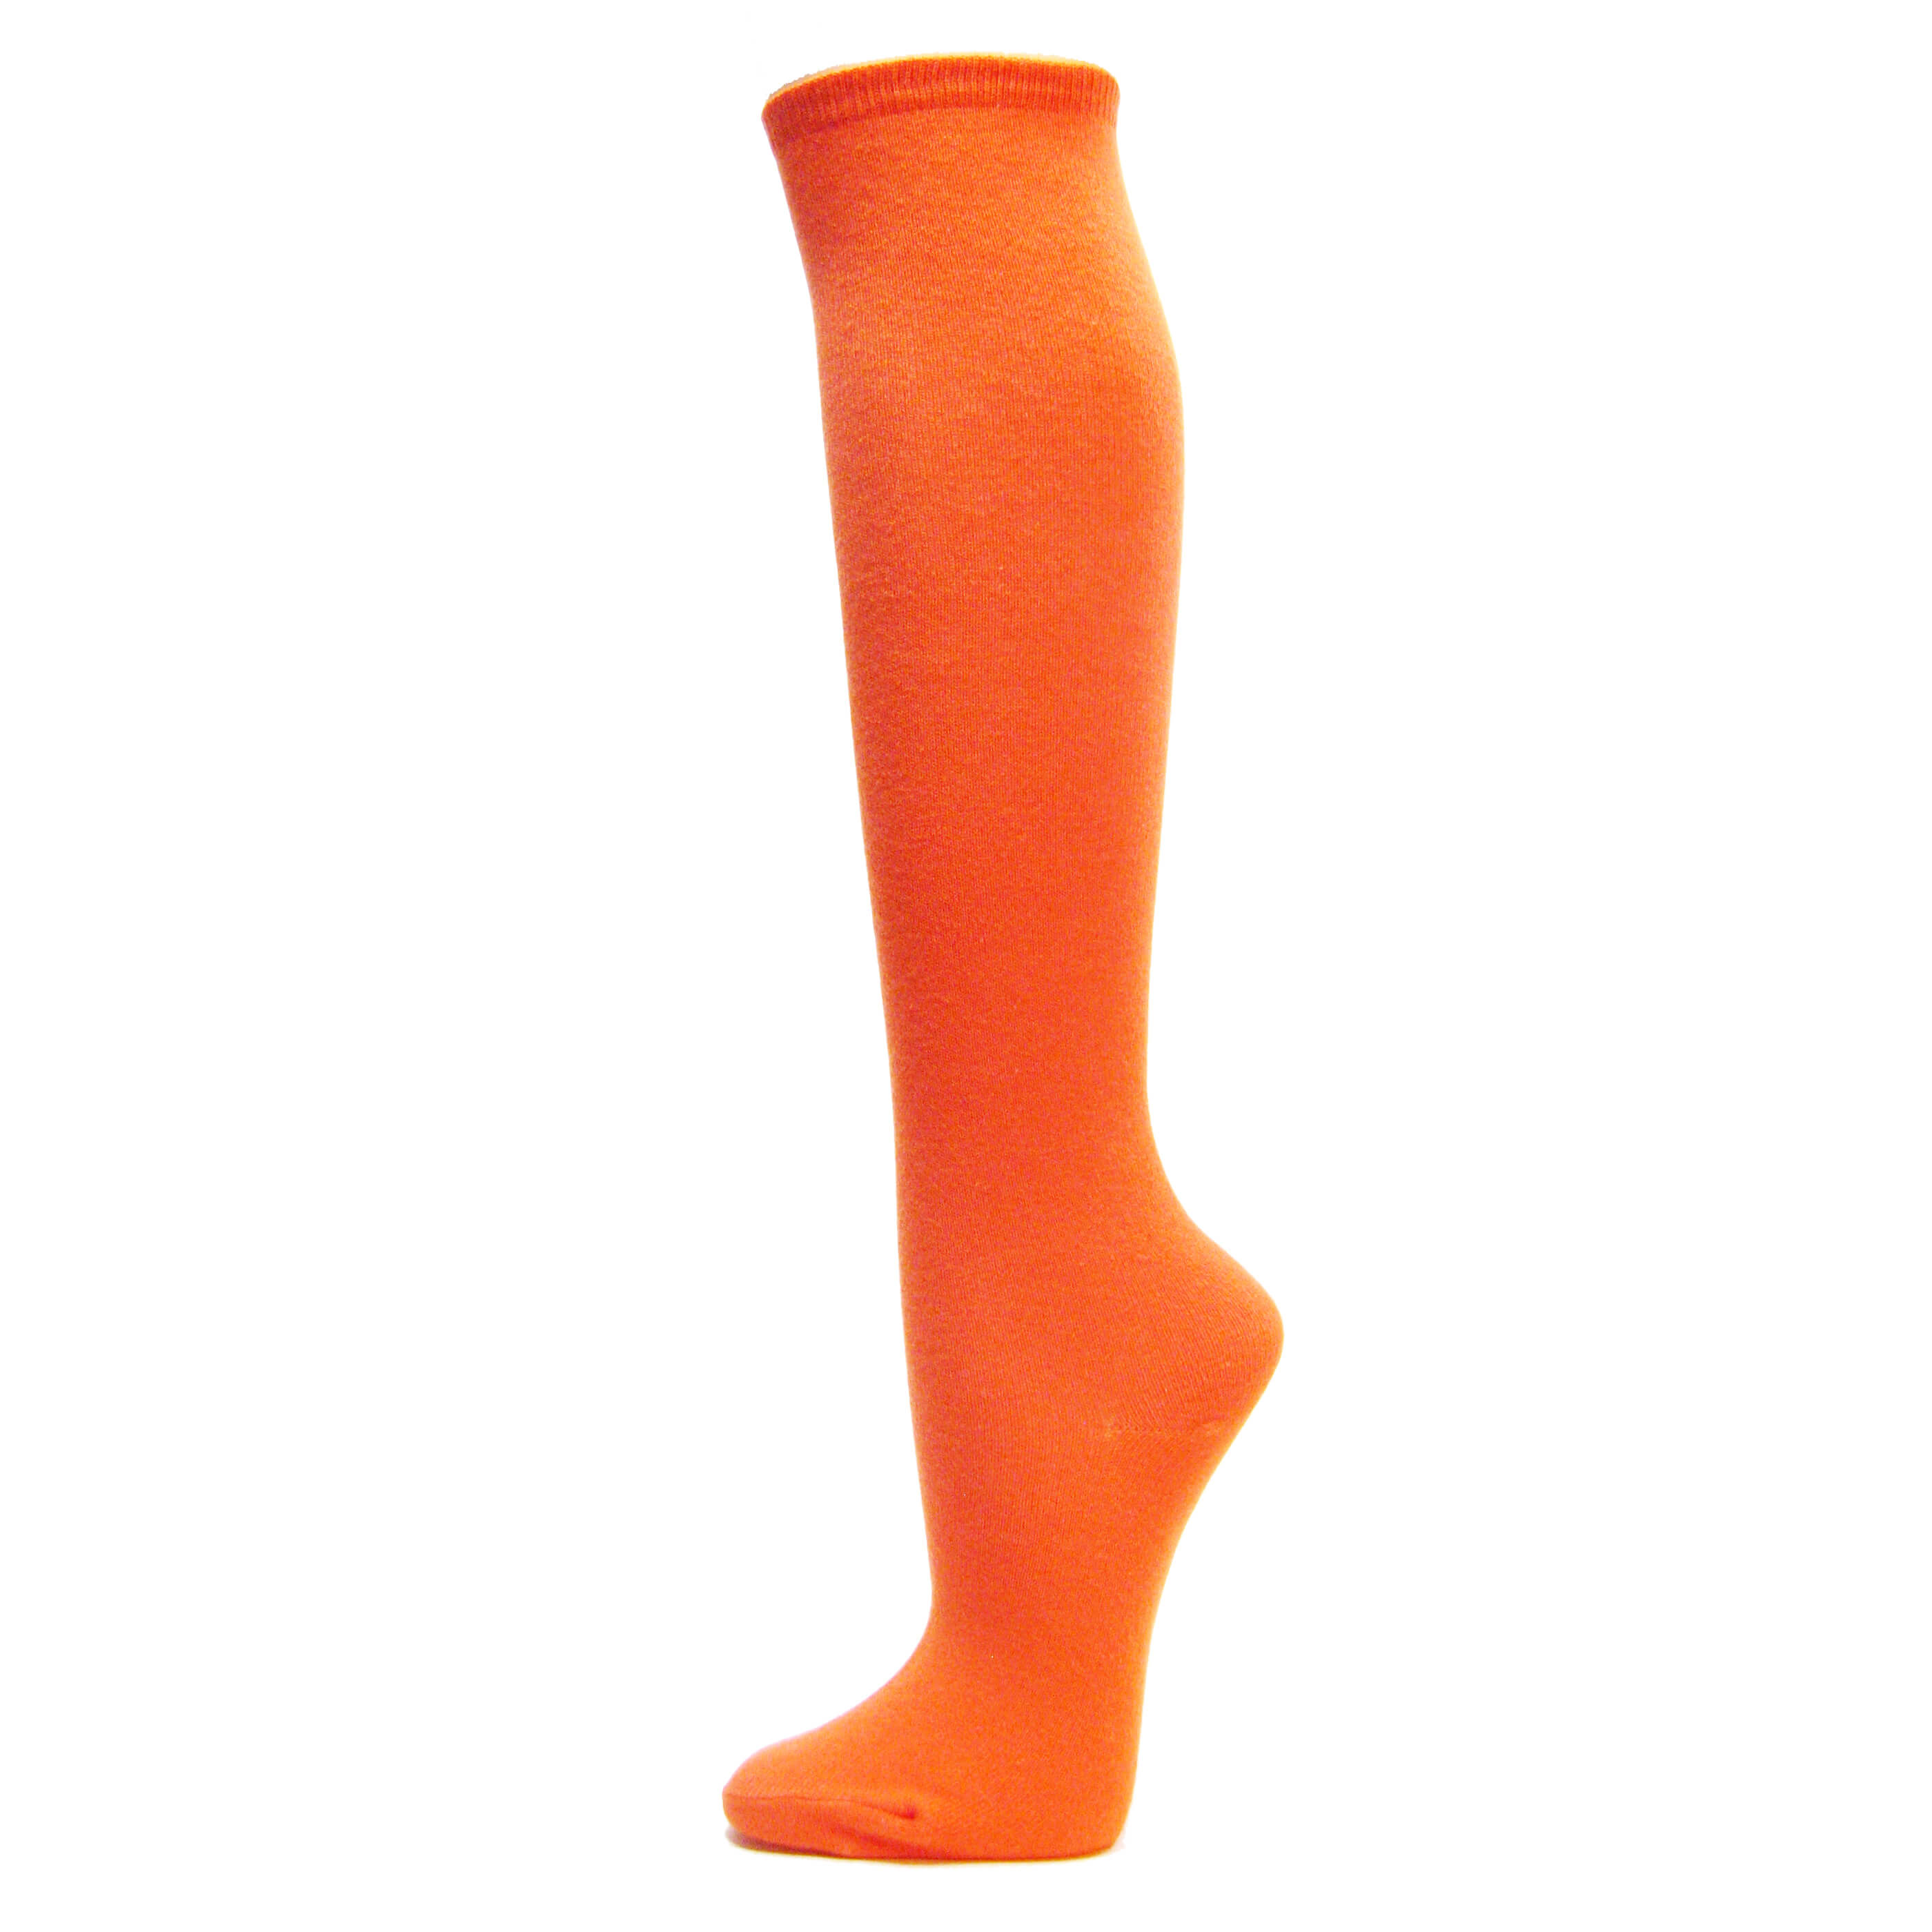 Light Orange Cotton Fashion/Casual Knee High Socks from Couver 6PAIRS